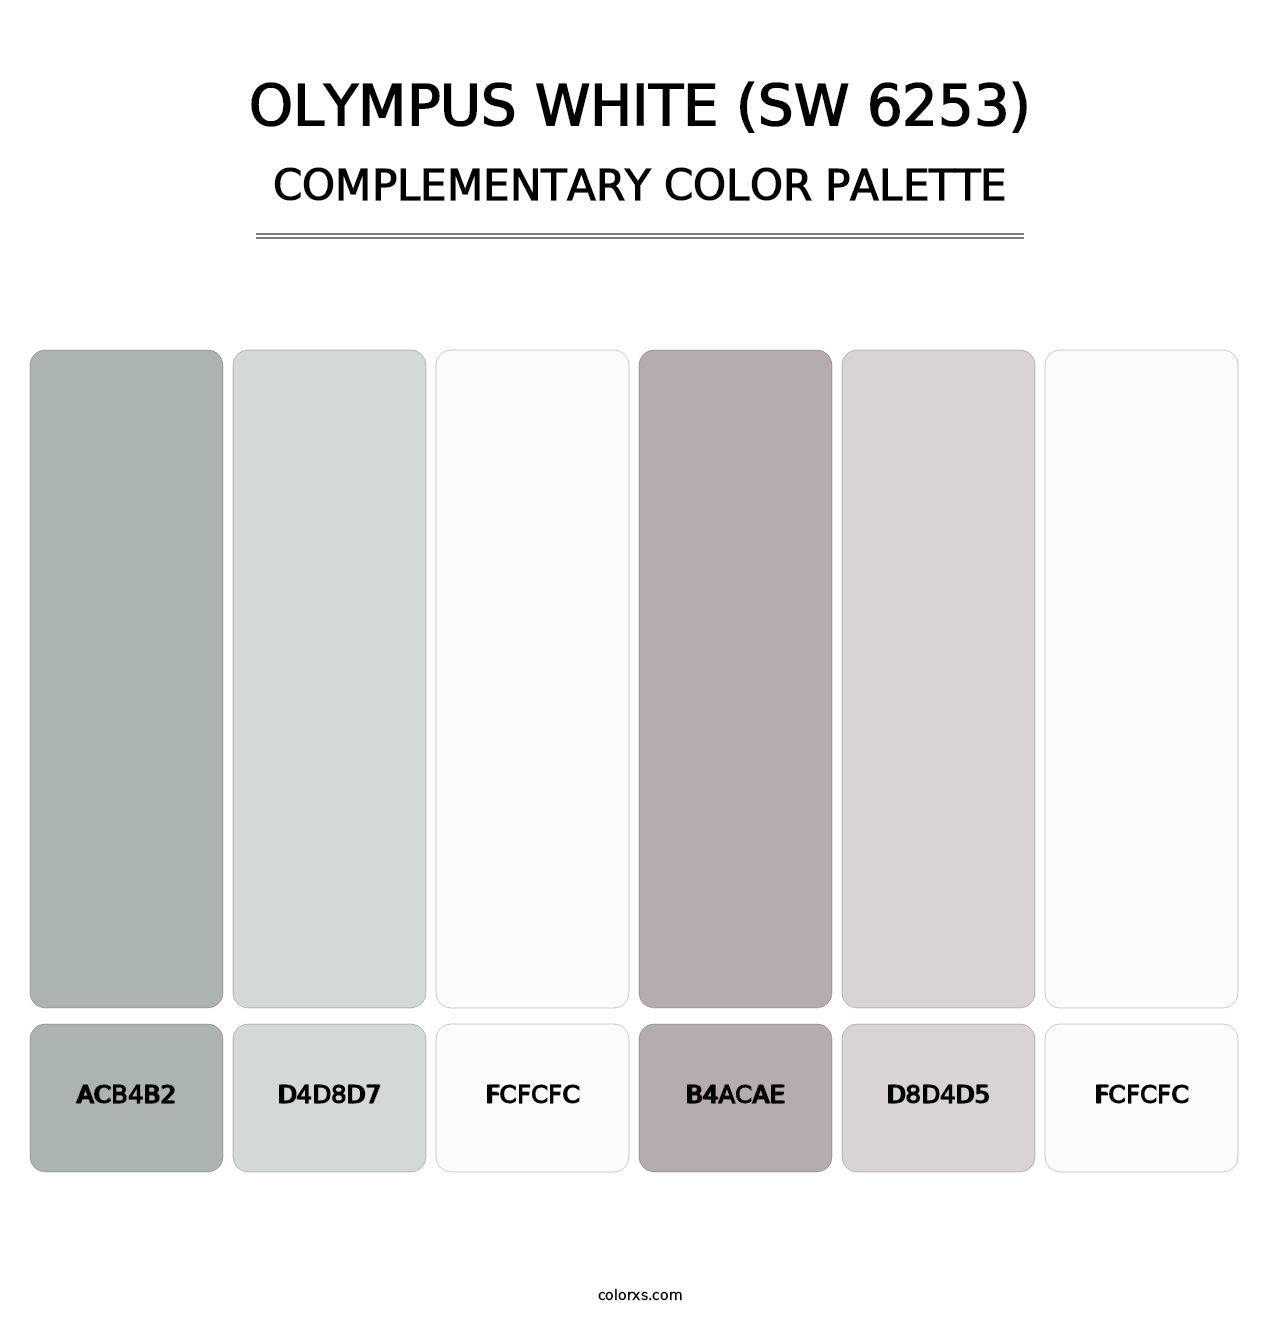 Olympus White (SW 6253) - Complementary Color Palette